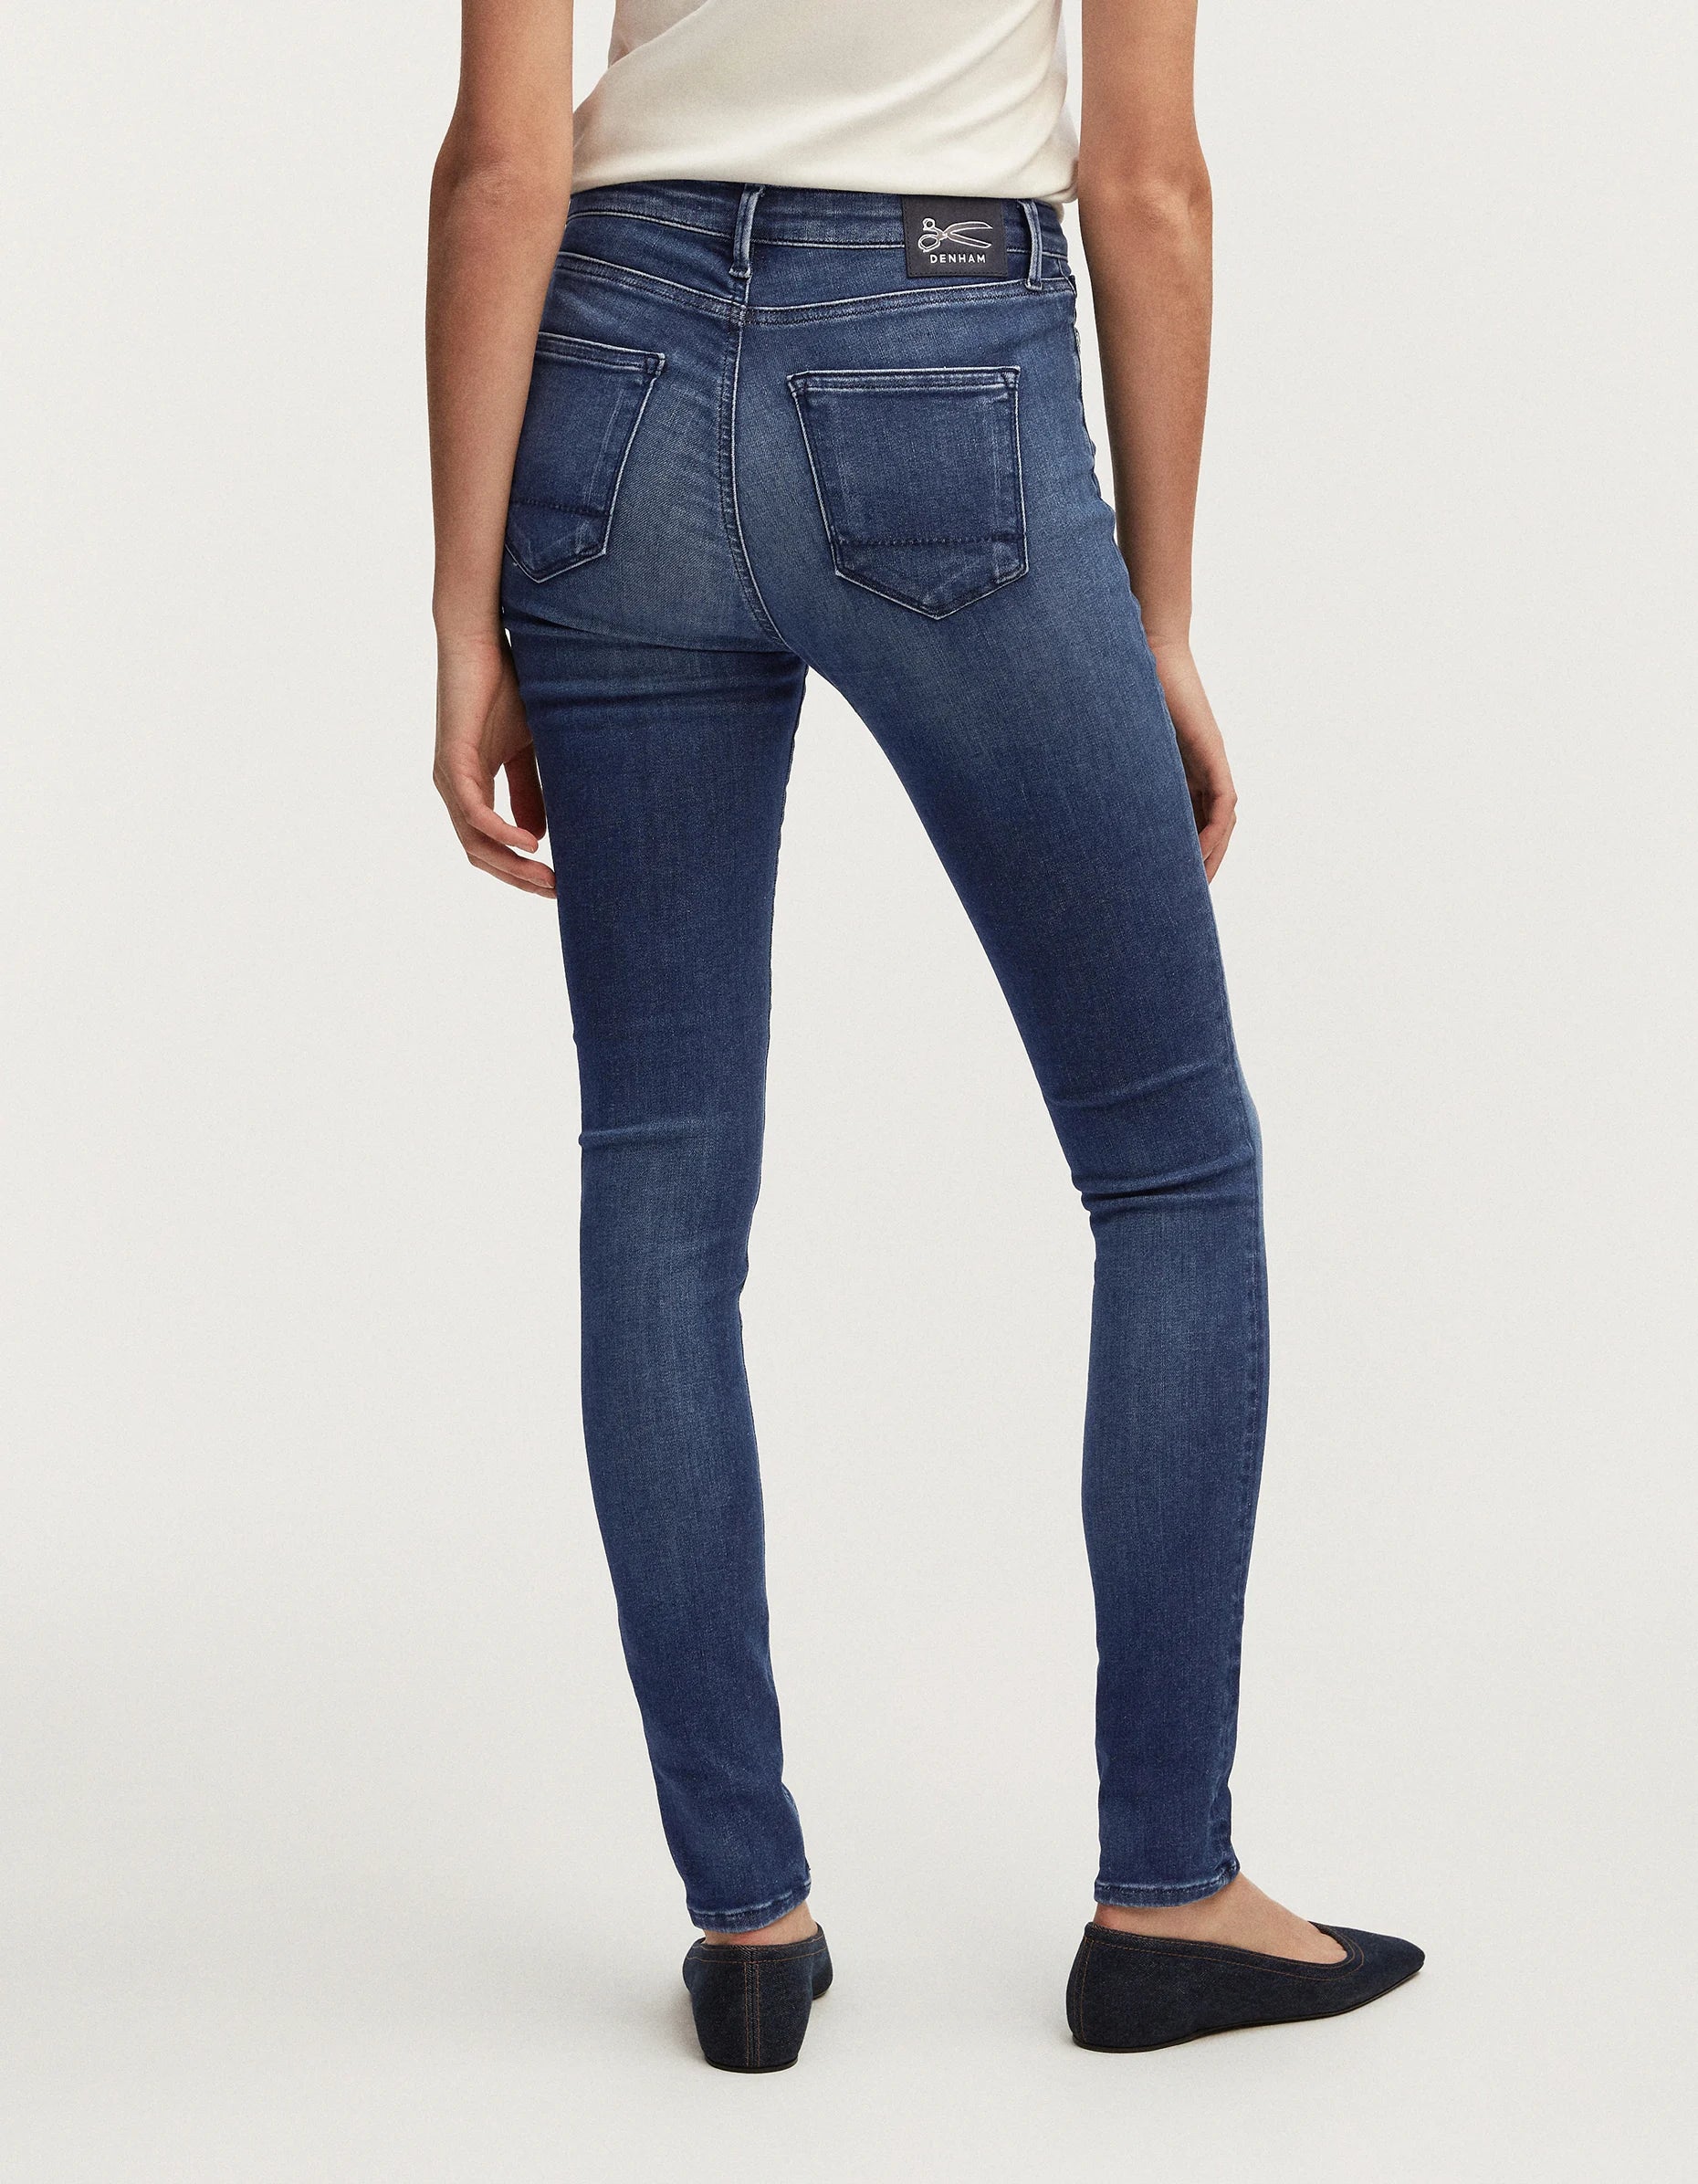 Product Description: The Denham NEEDLE Skinny - Dark Soft Wash blue jeans offer a comfortable fit and free movement for the legs.